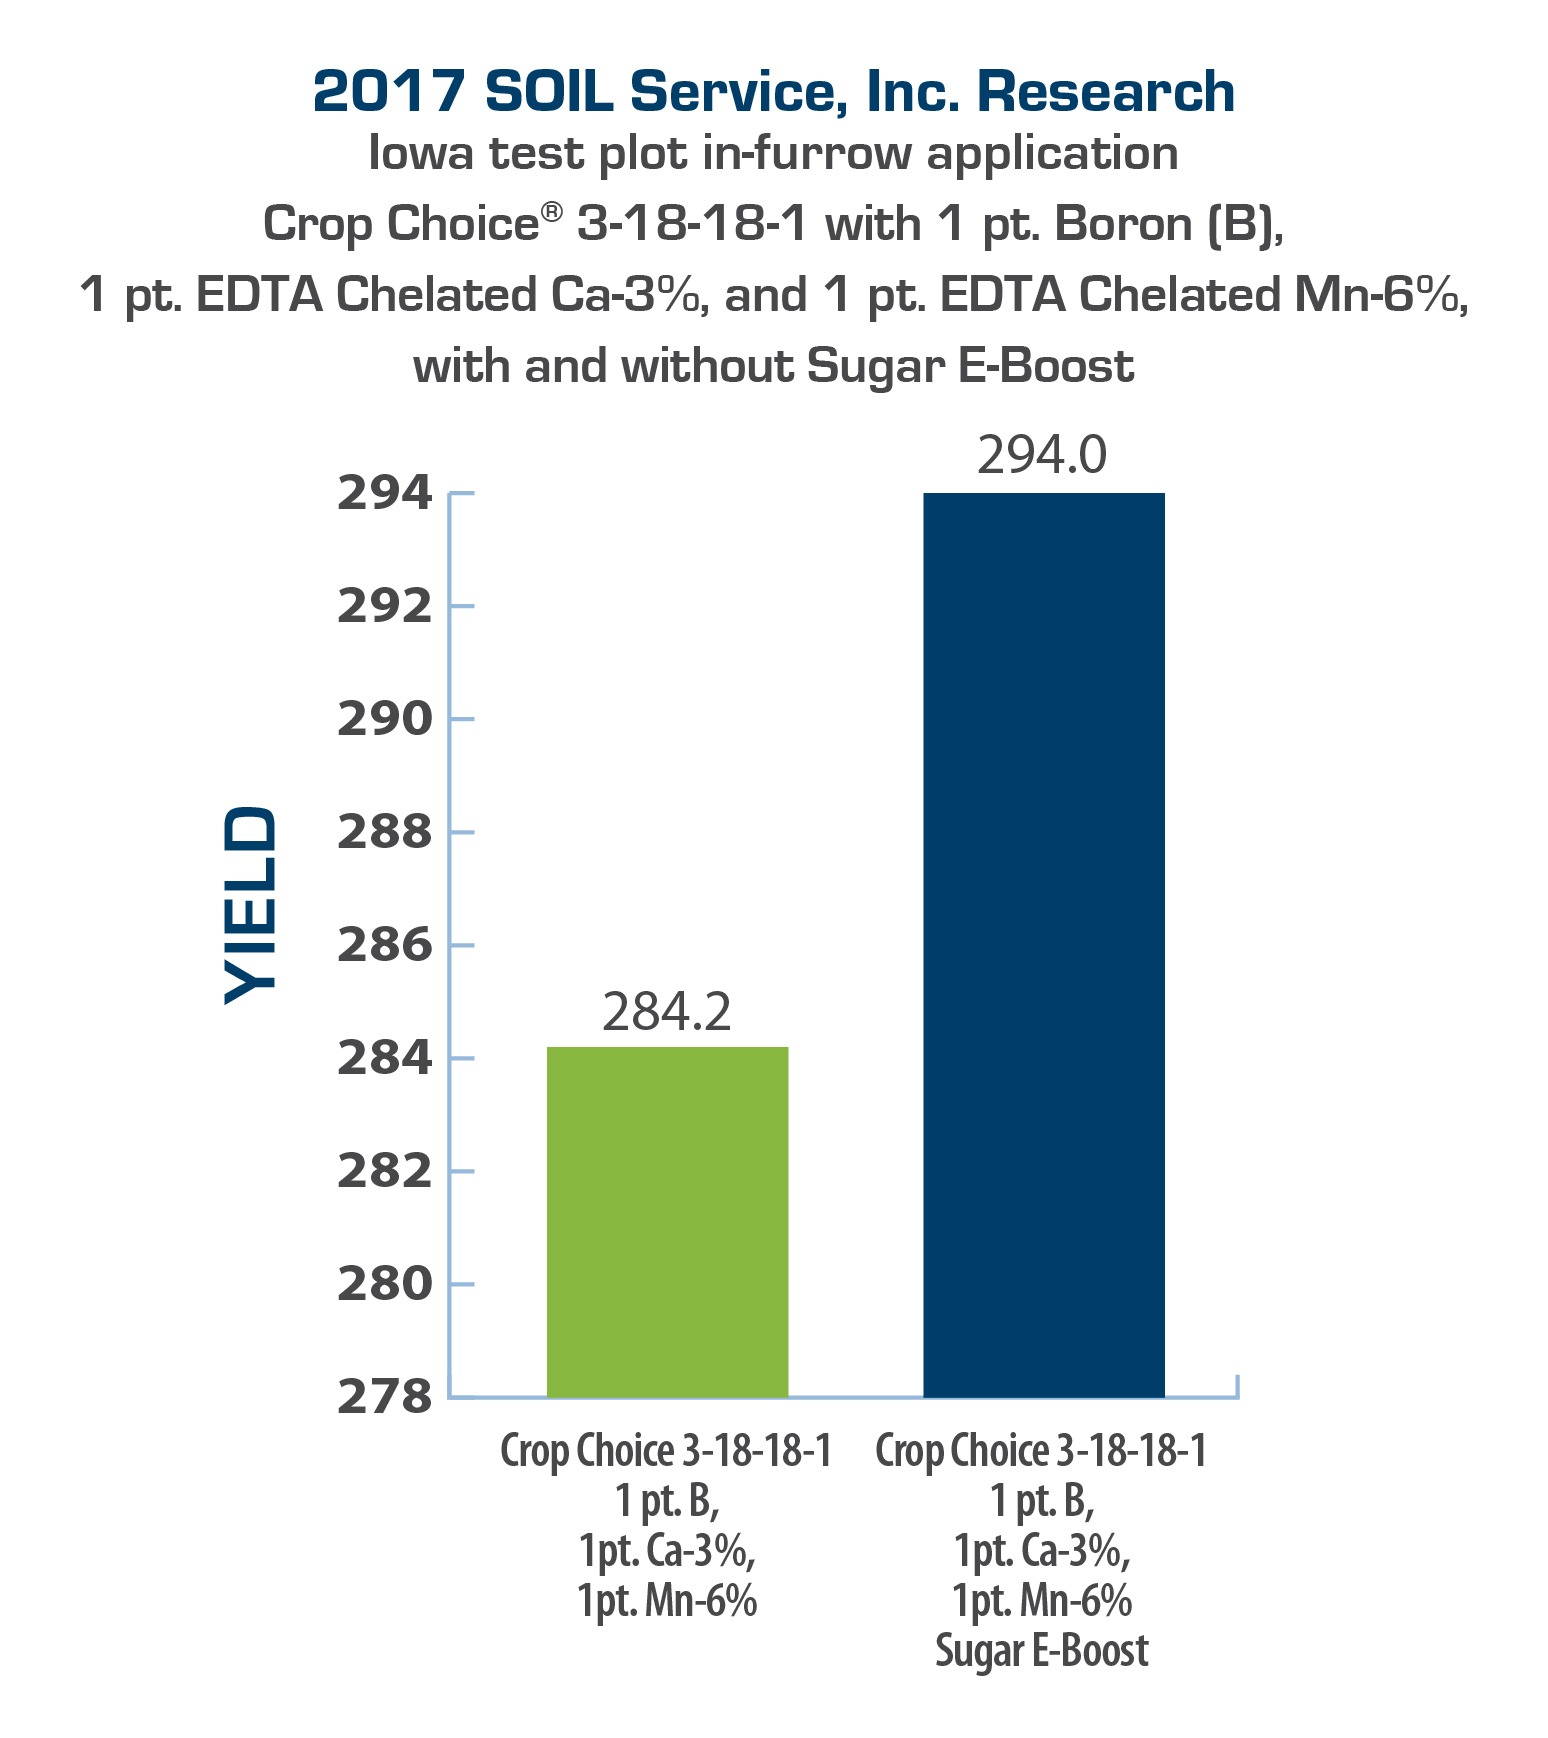 Bar chart displaying 2017 results for Crop Choice and Sugar E-Boost at Iowa test plot